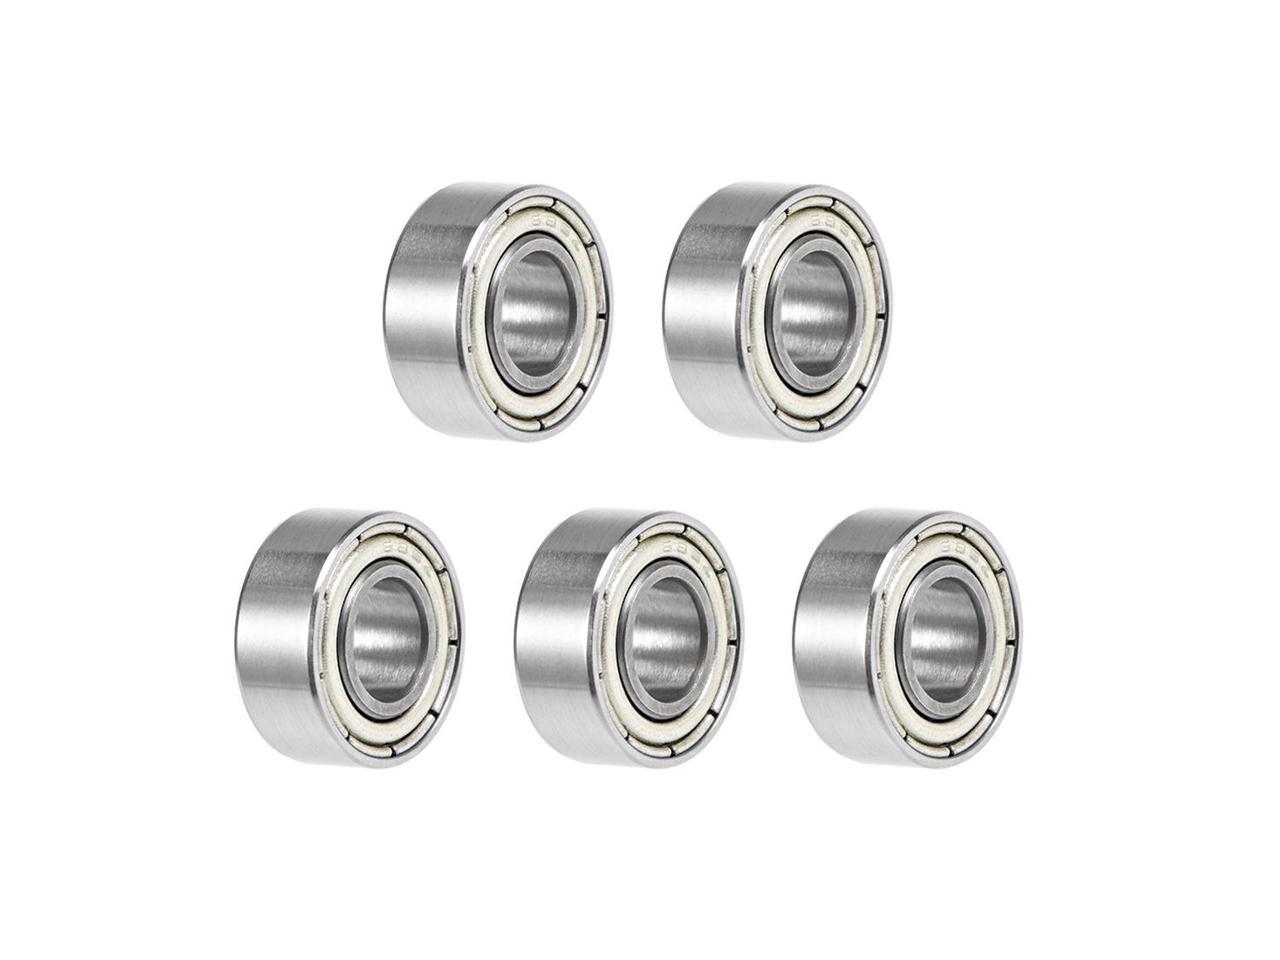 2 pieces 686-ZZ  Double Shielded Bearings  6mm x 13mm x 5mm  Free Shipping 